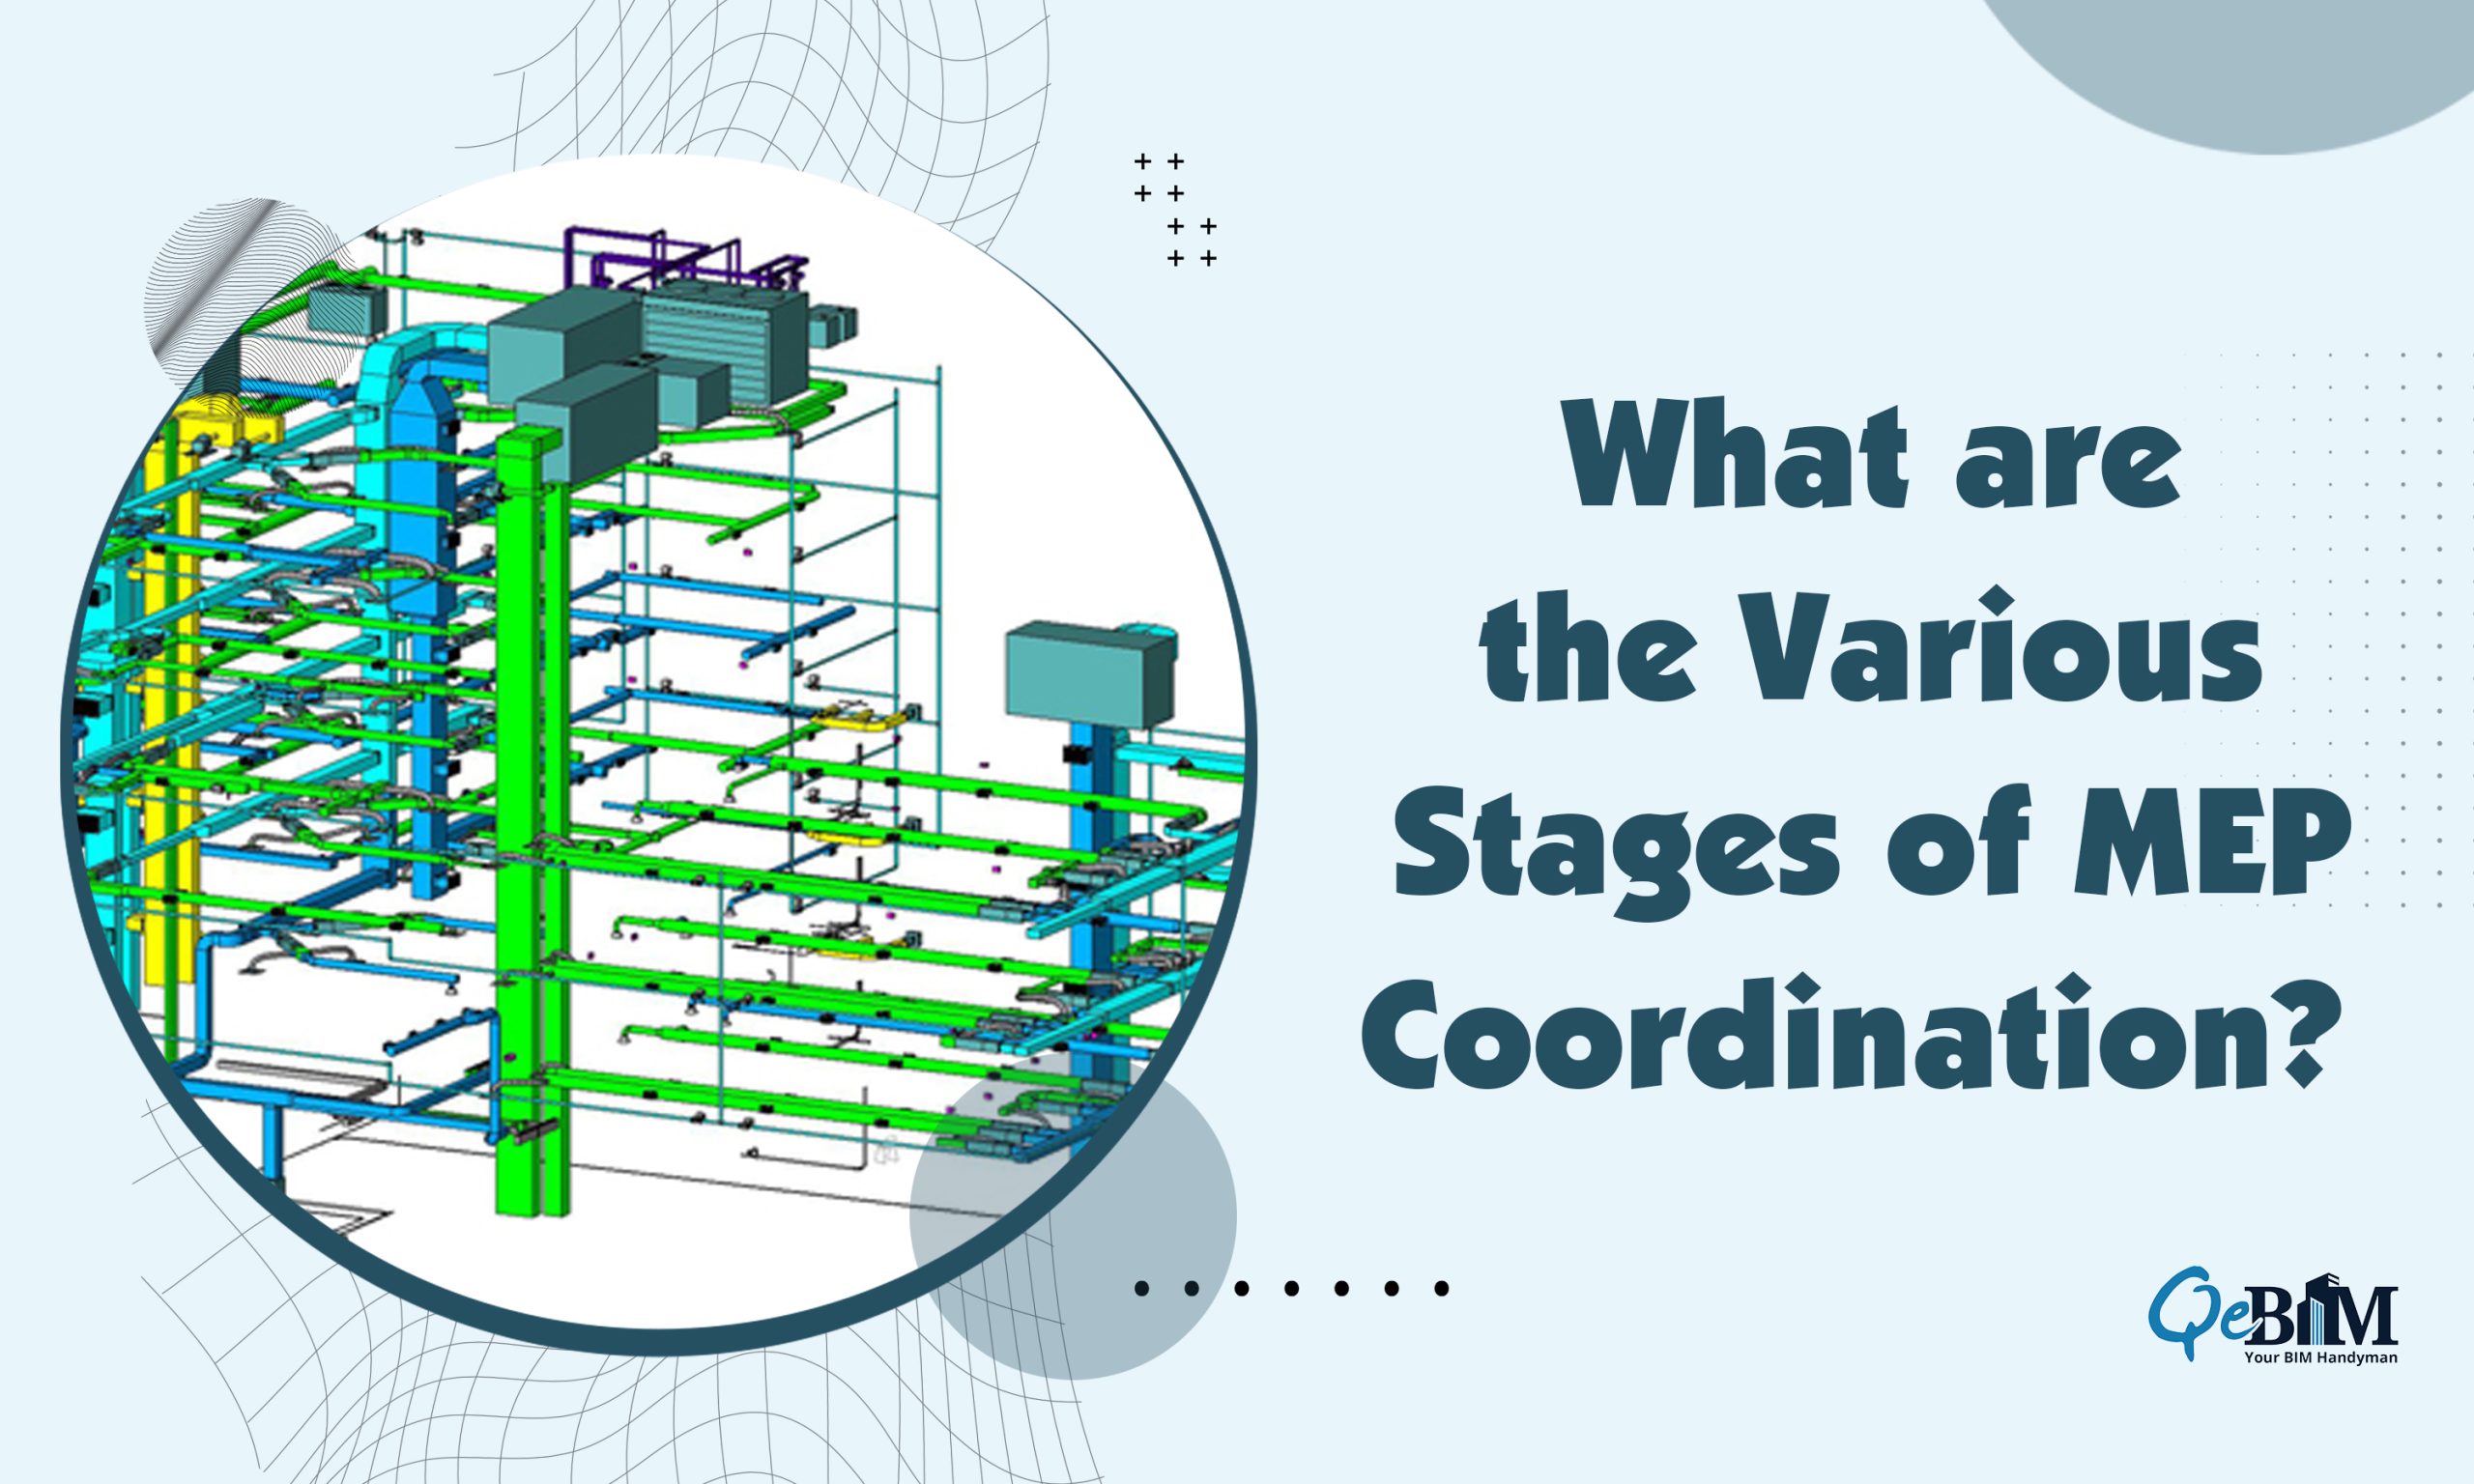 What are the Various Stages of MEP Coordination?